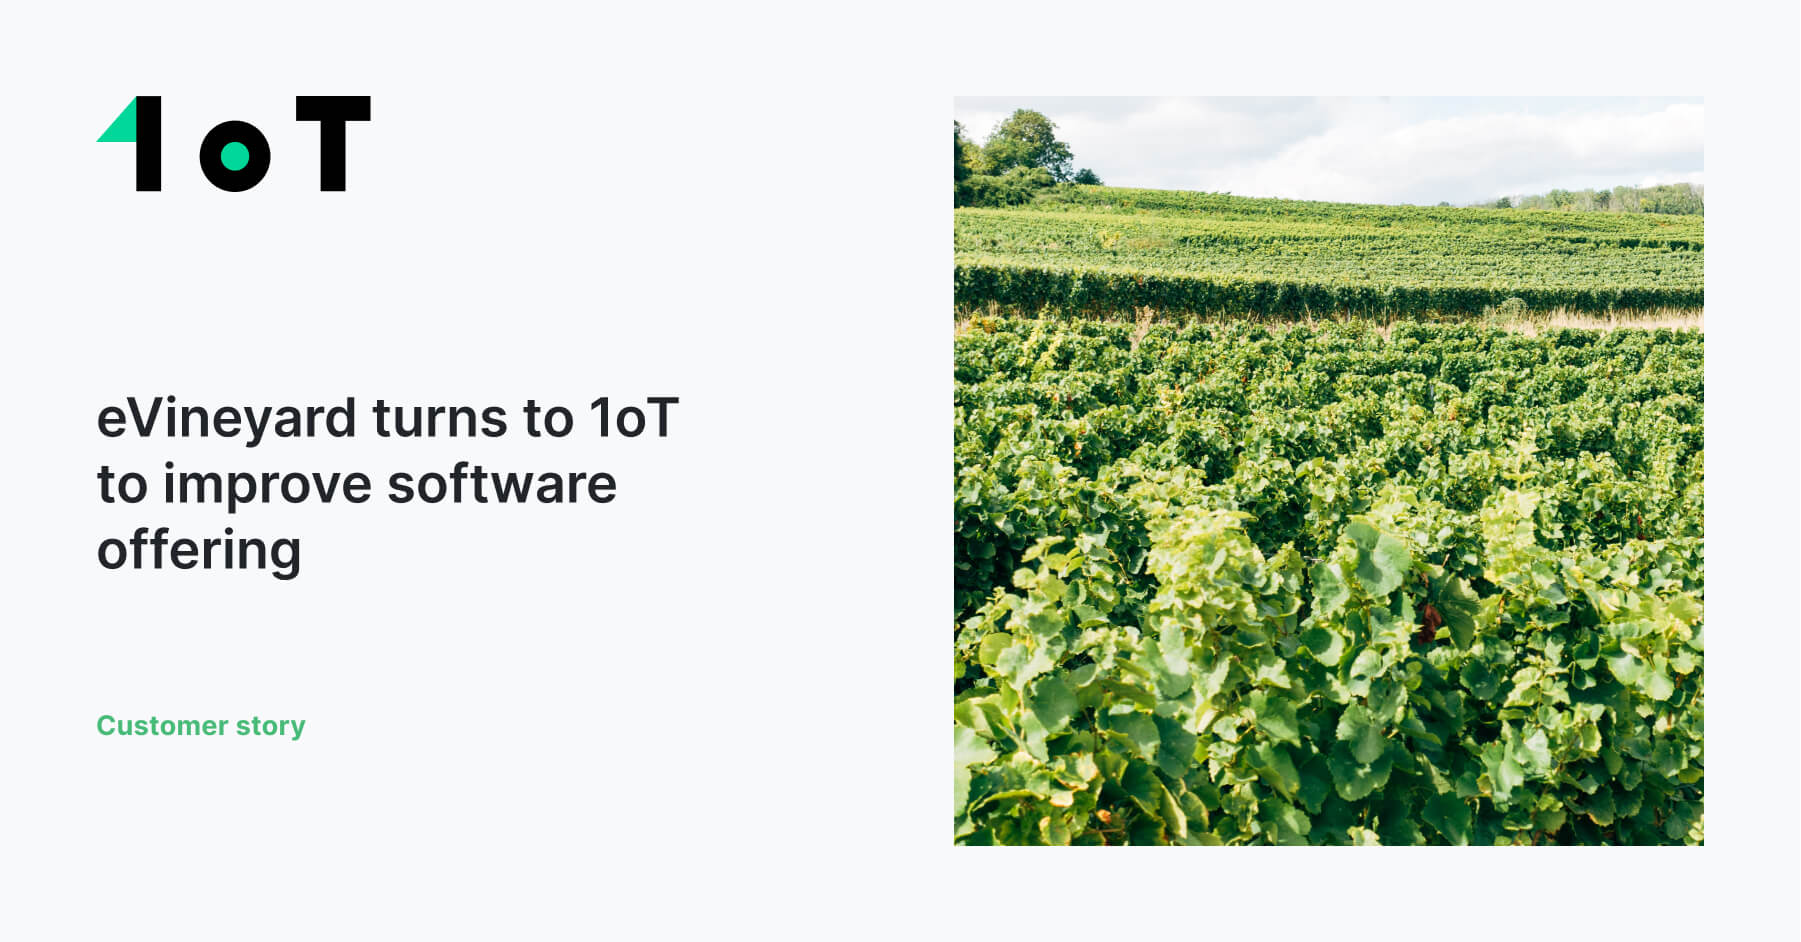 Article cover image for eVineyard turns to 1oT to improve software offering